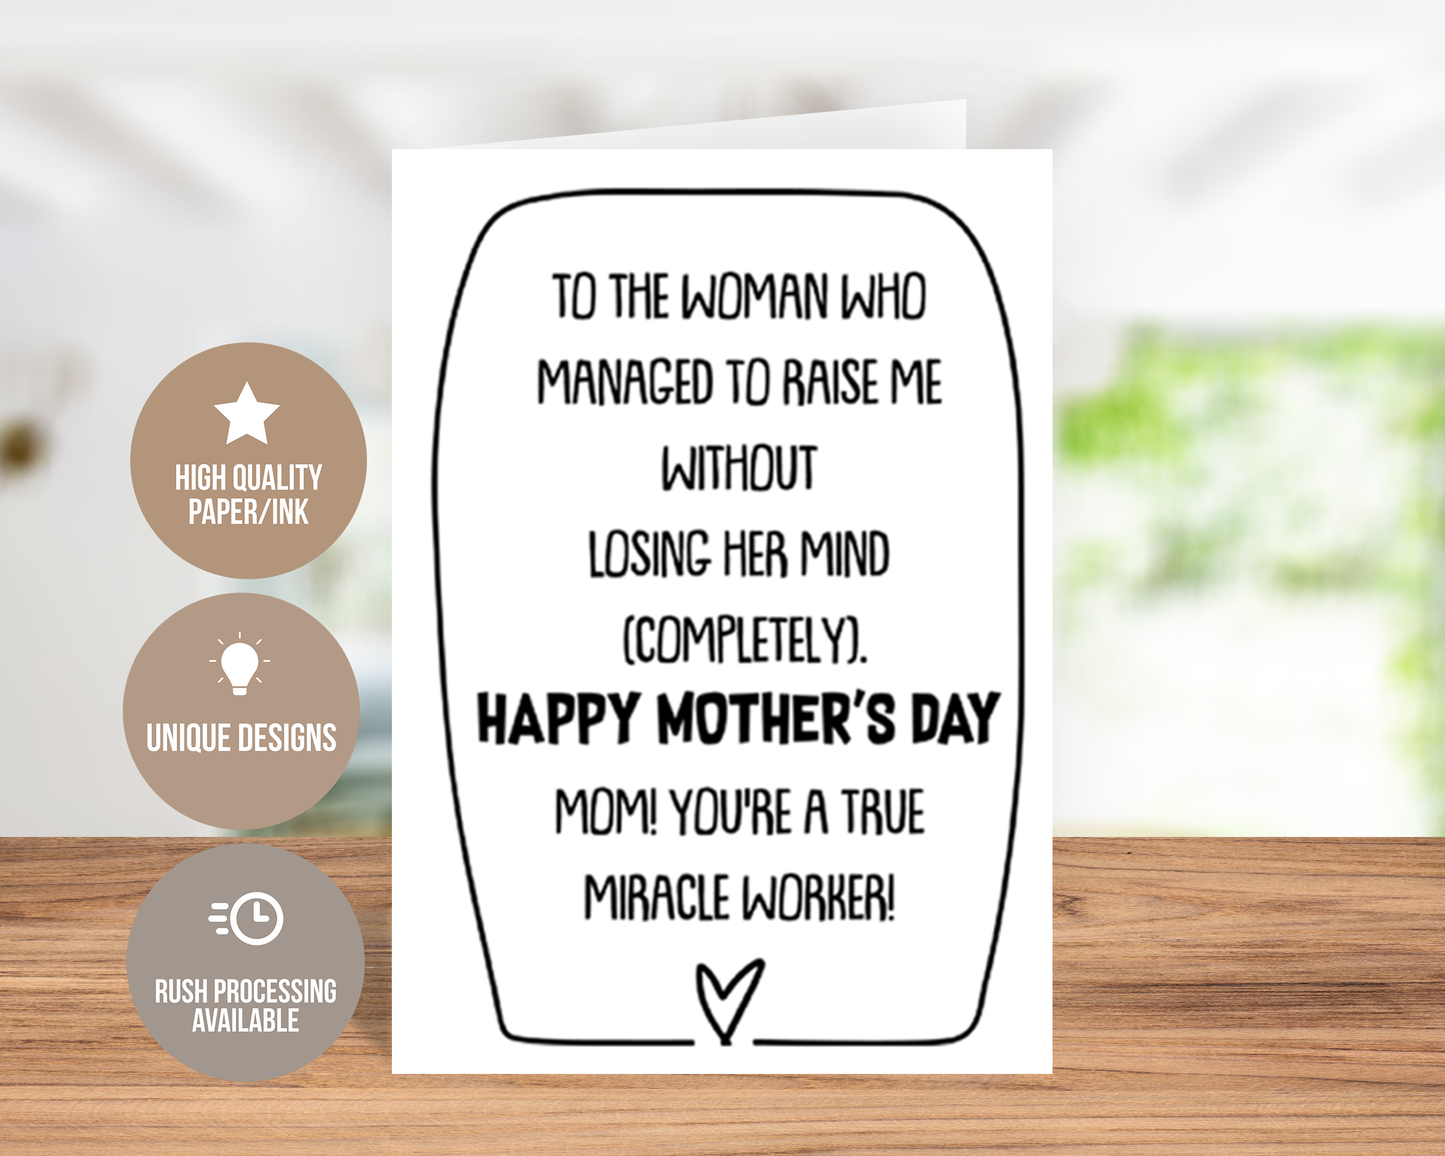 To The Woman Who Managed To Raise Me Without Losing Her Mind - Mother's Day Card